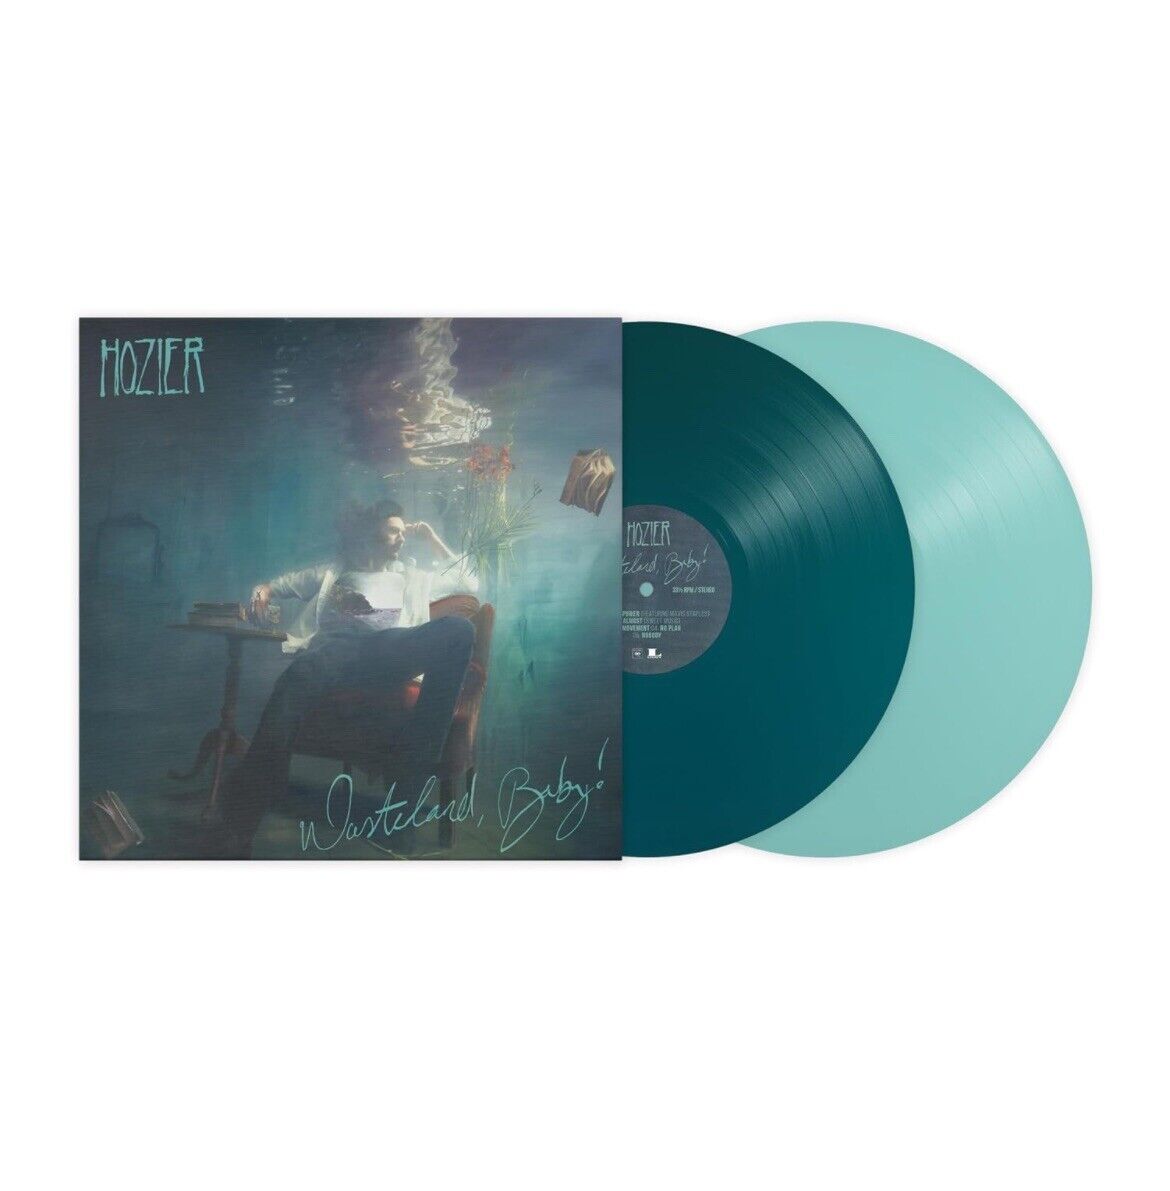 Limited Sea and Light Blue Vinyl 2LP Hozier Wasteland Baby Brand New Mint Rock